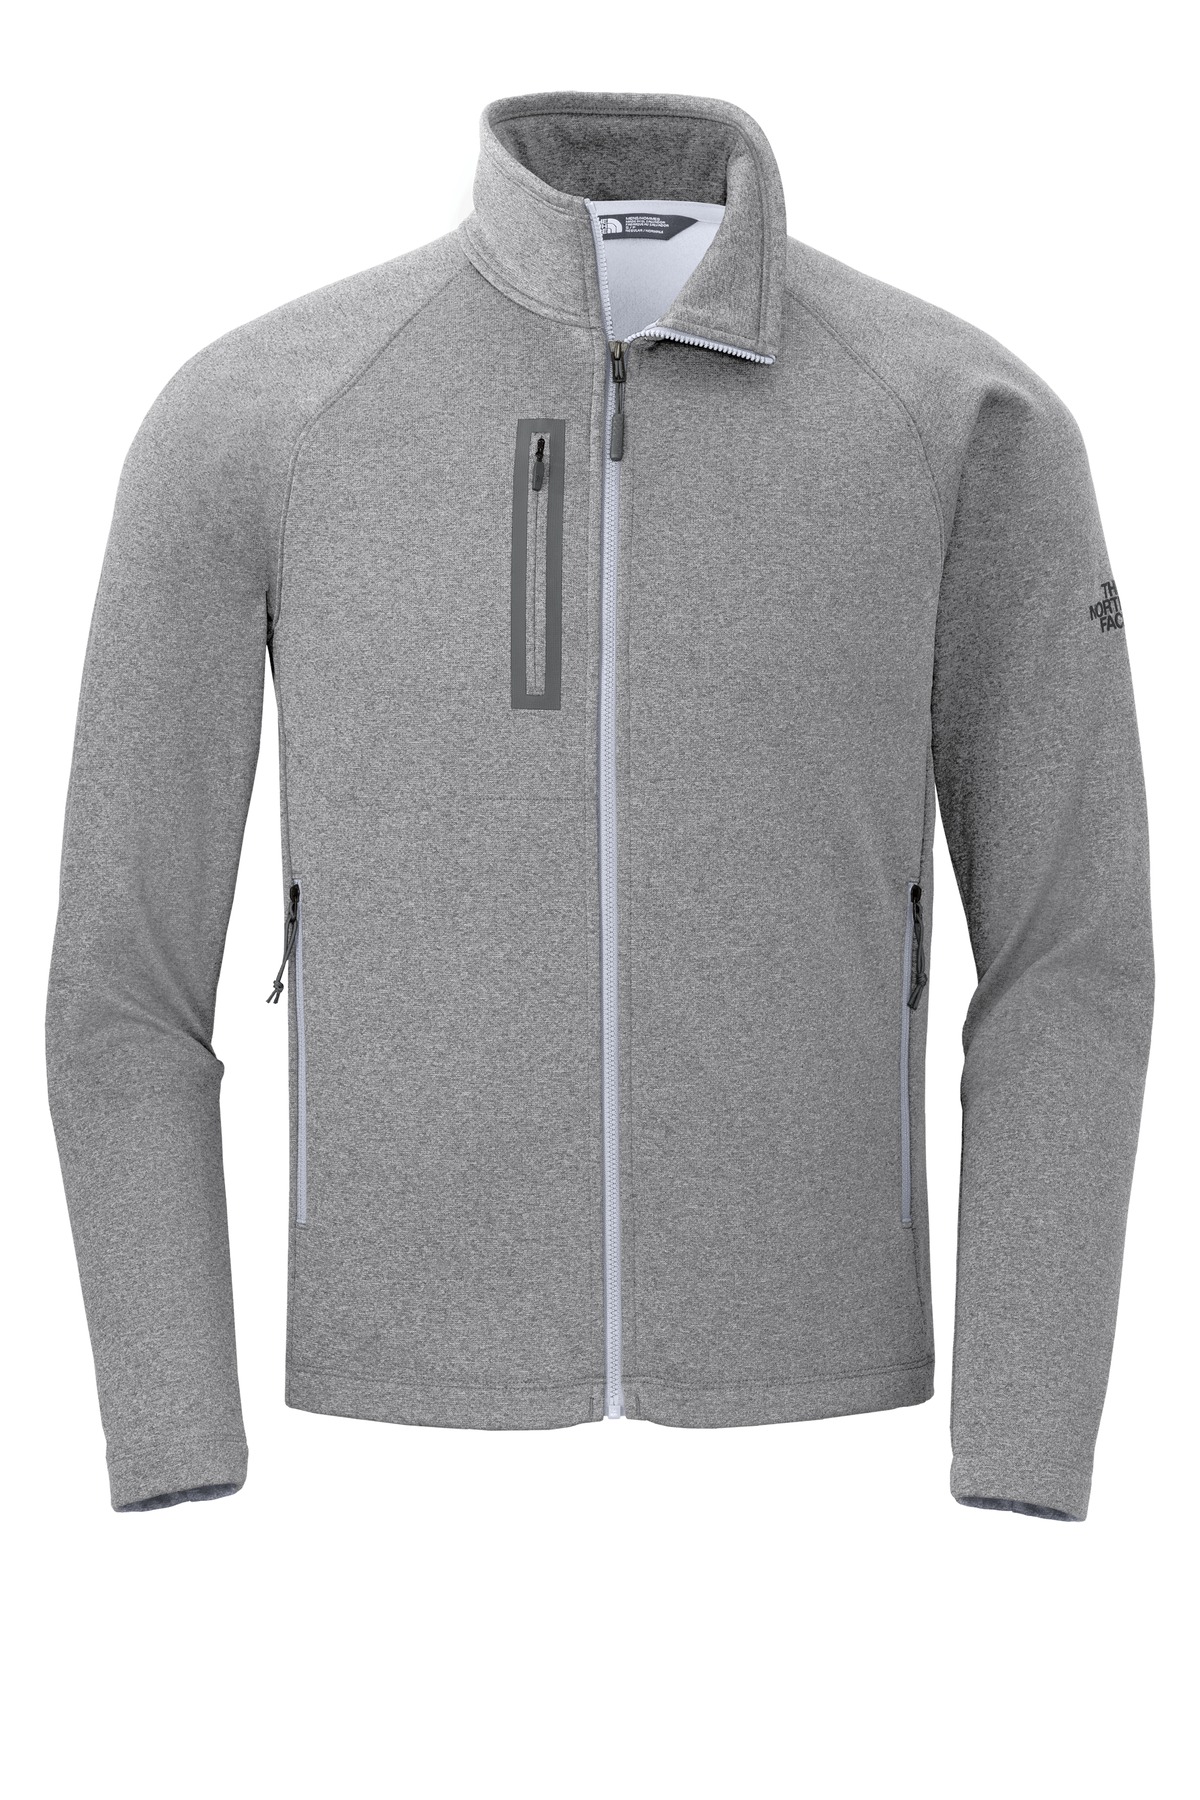 The North Face Ladies Canyon Flats Fleece Jacket. NF0A3LHA.